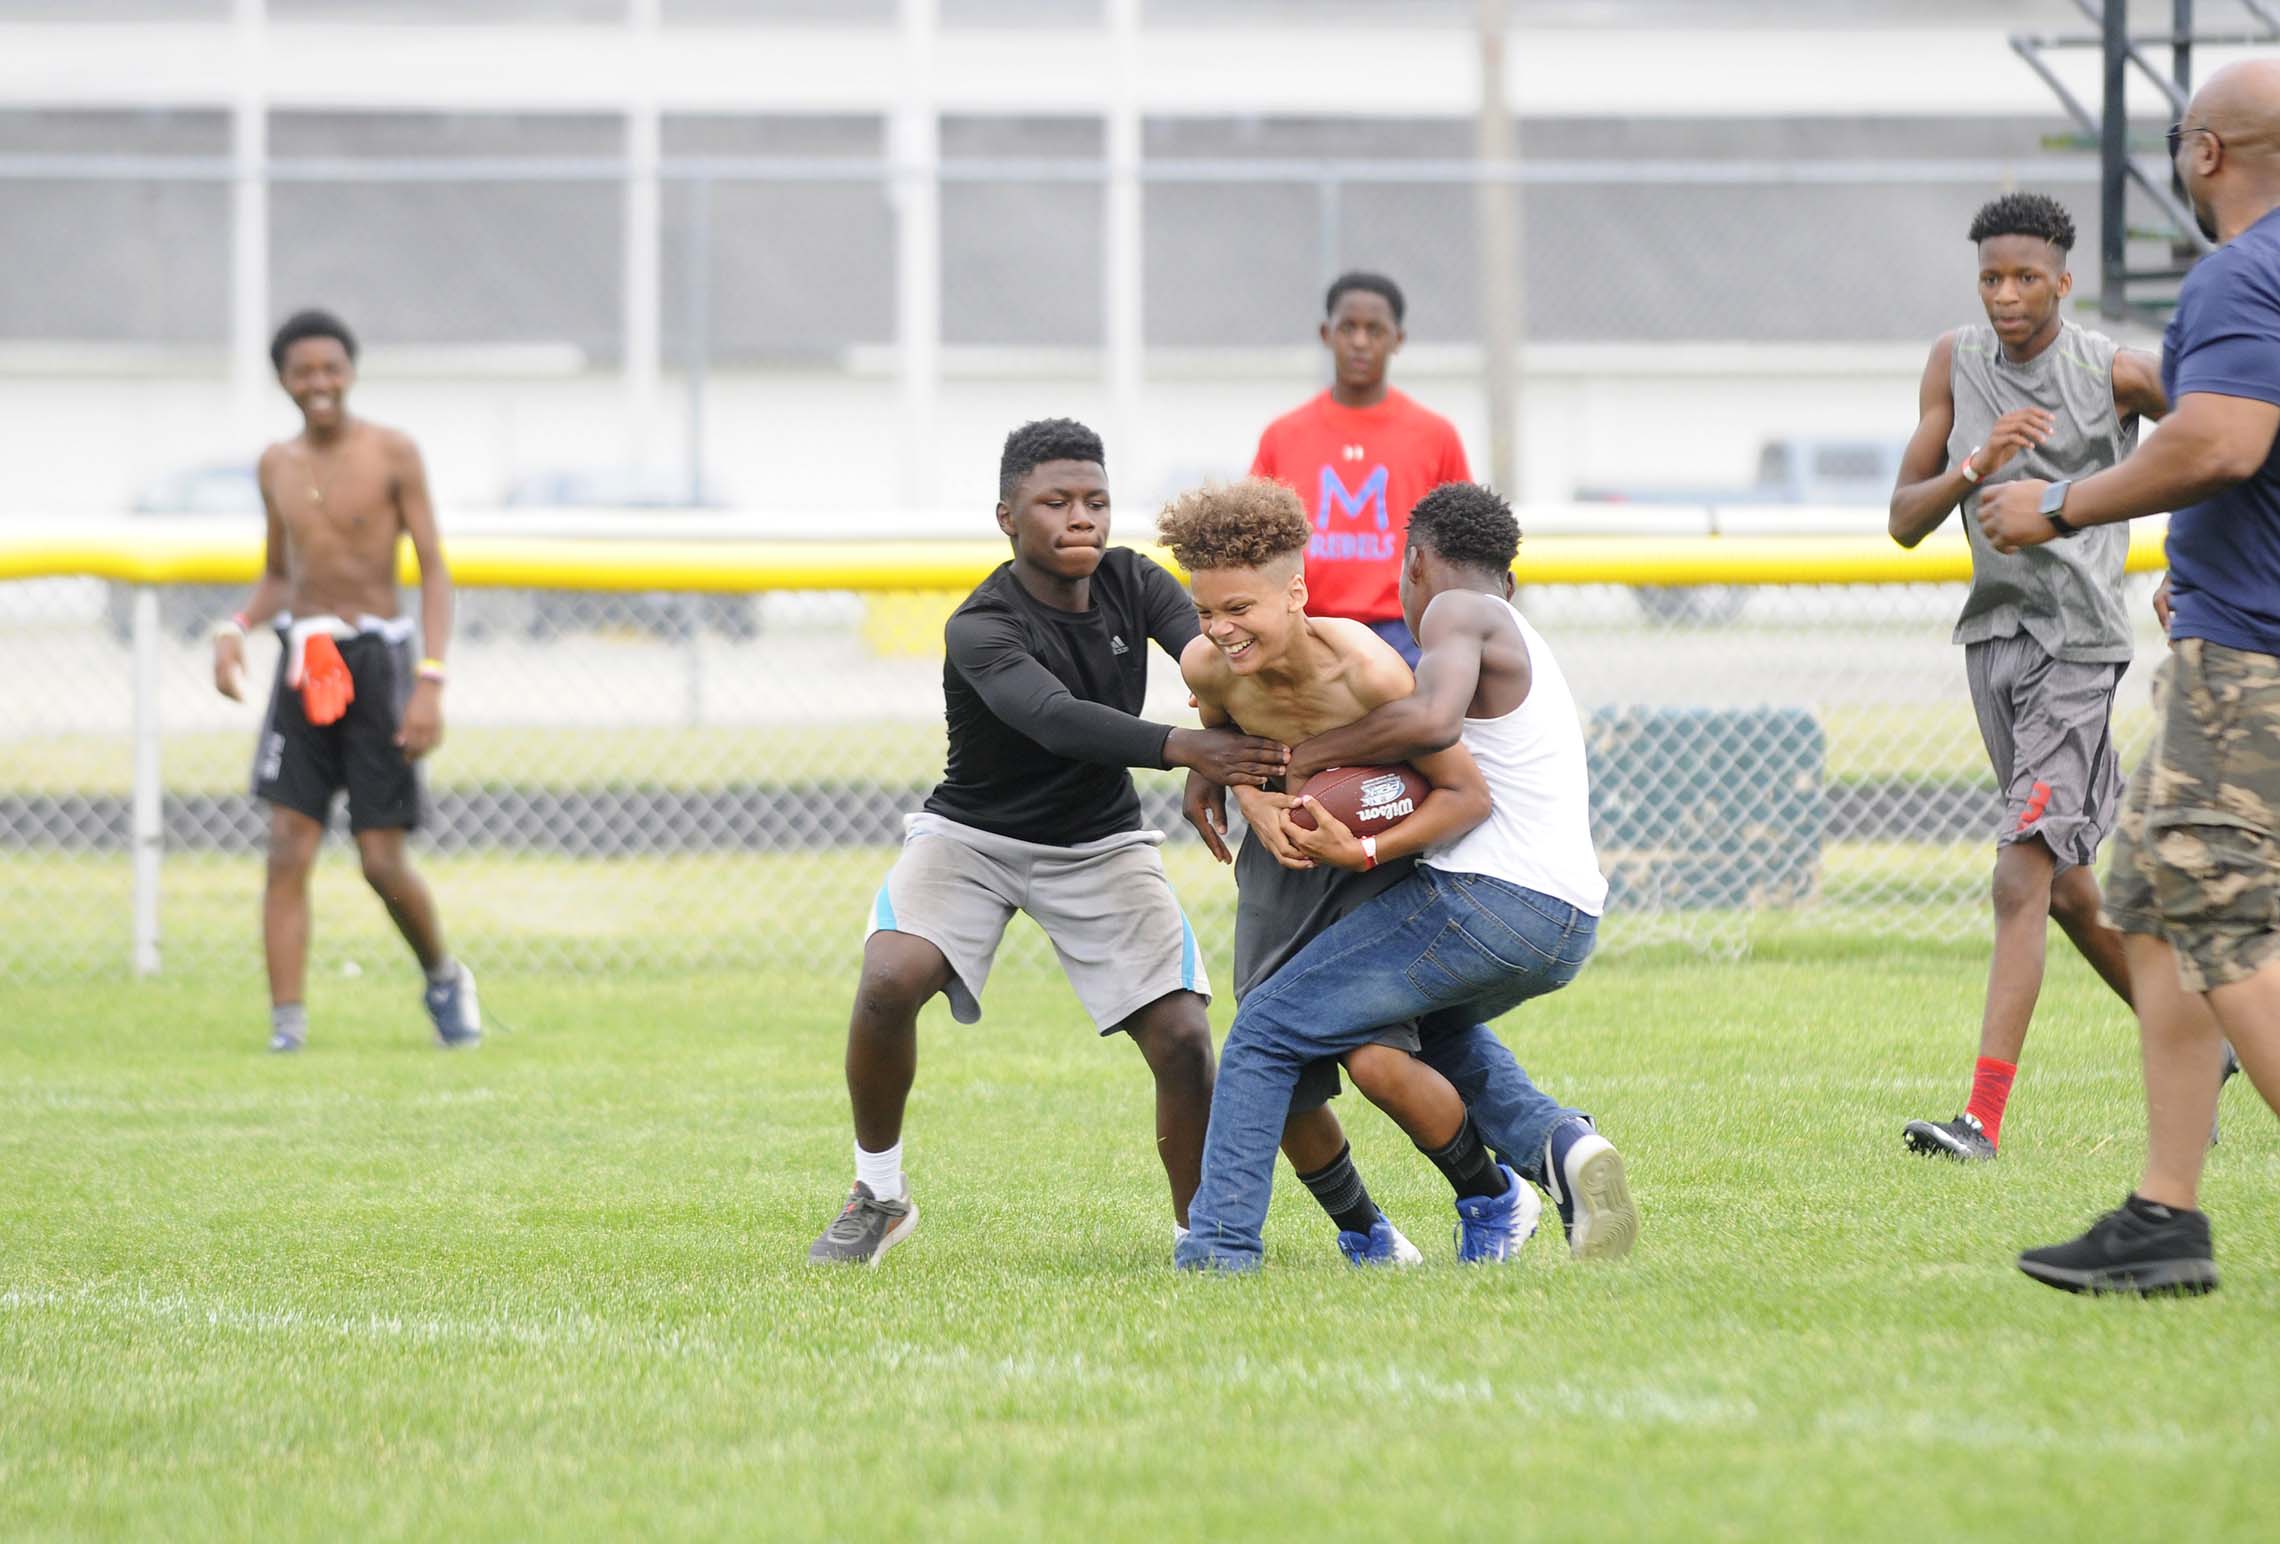  A participant in Haglers 12th Annual Kidz-Kan-Do Football and Cheerleading Camp is tackled Saturday on the football field at Bishop McNamara High School in Kankakee. The camp is hosted by the Tyjuan Hagler Foundation and includes various football dr